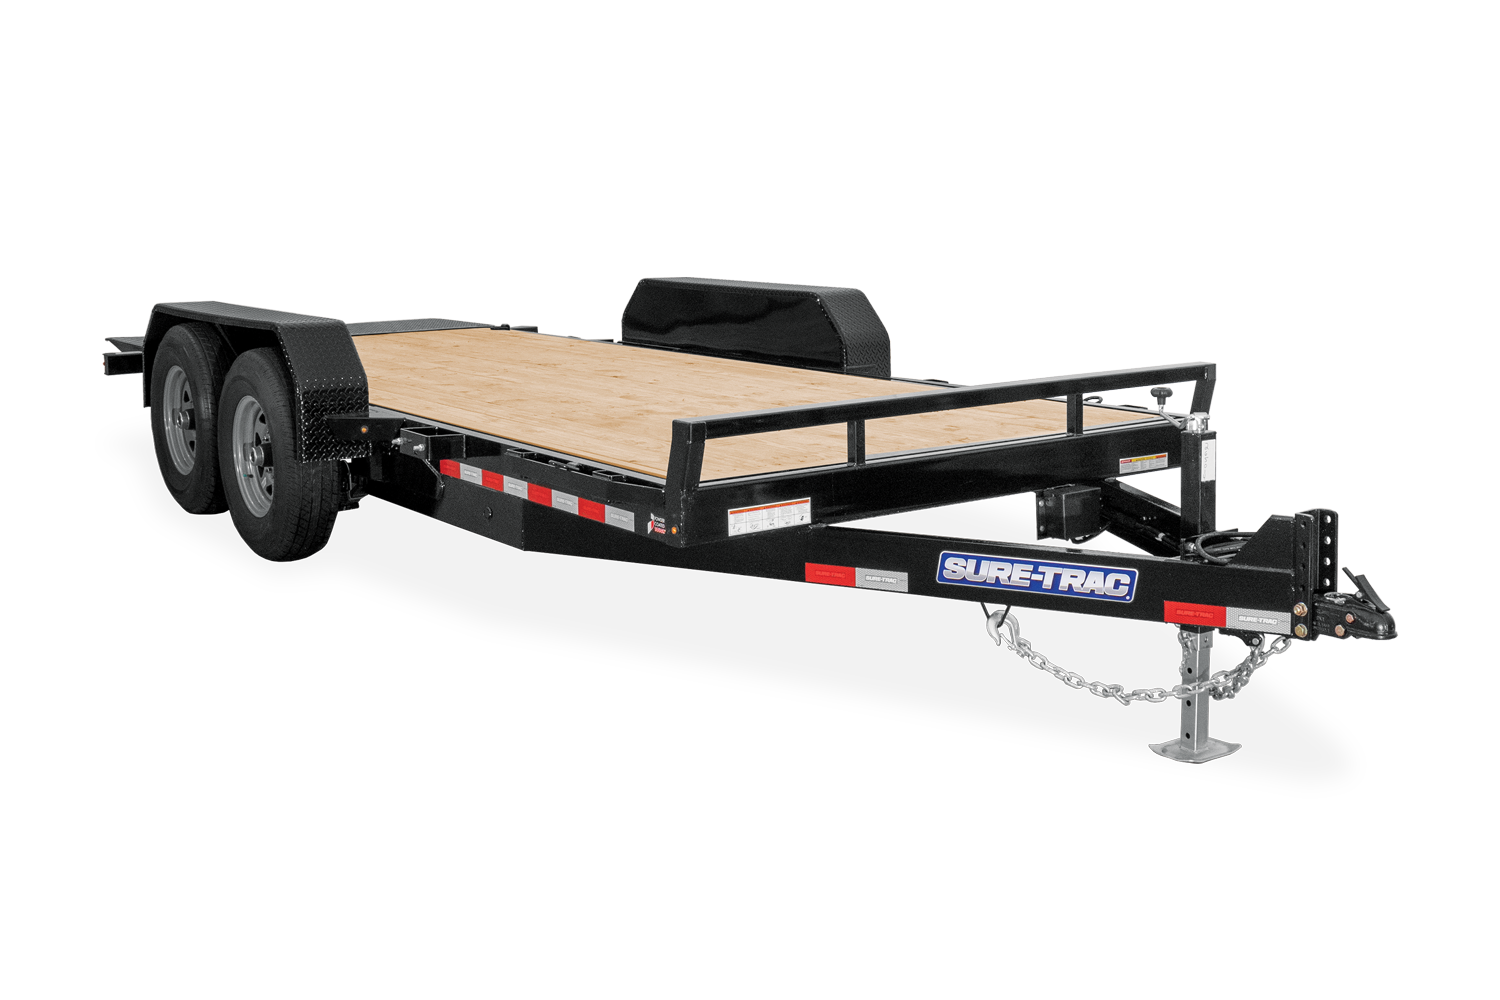 Sure-Trac | Image | Wide view of the Tilt Bed Equipment Trailer Not Tilted